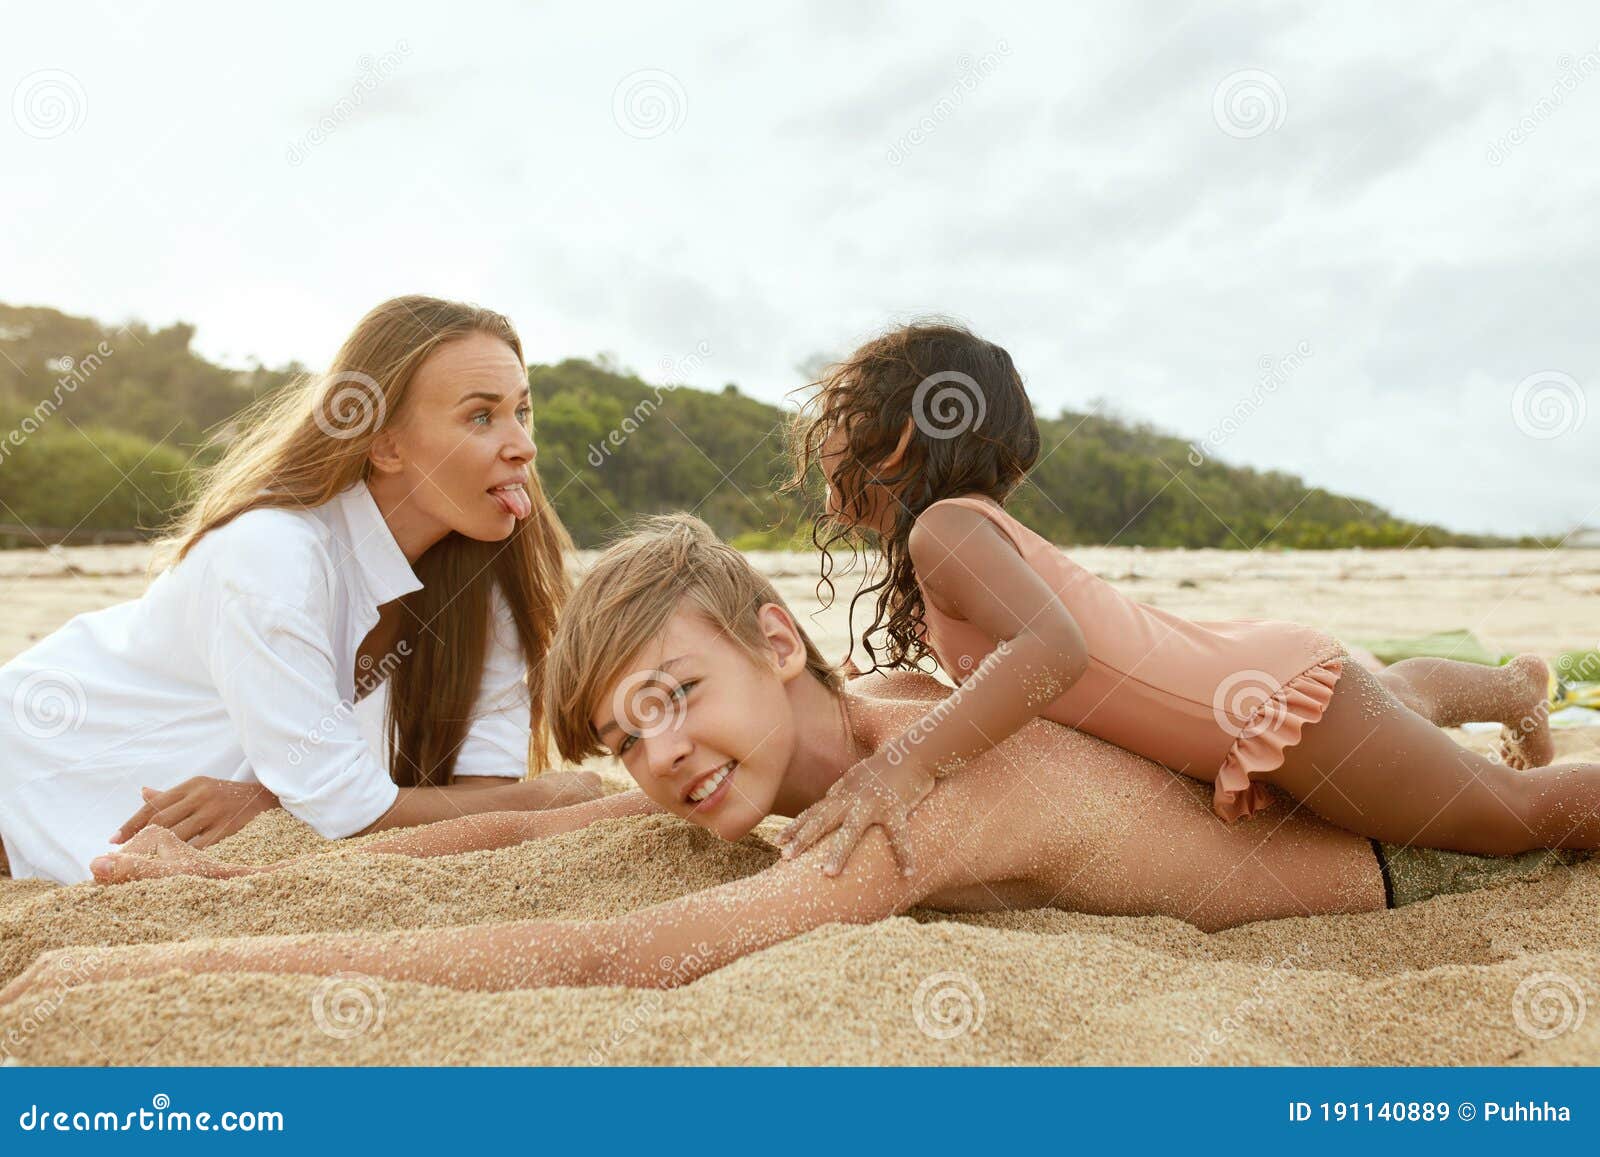 Family nude bech